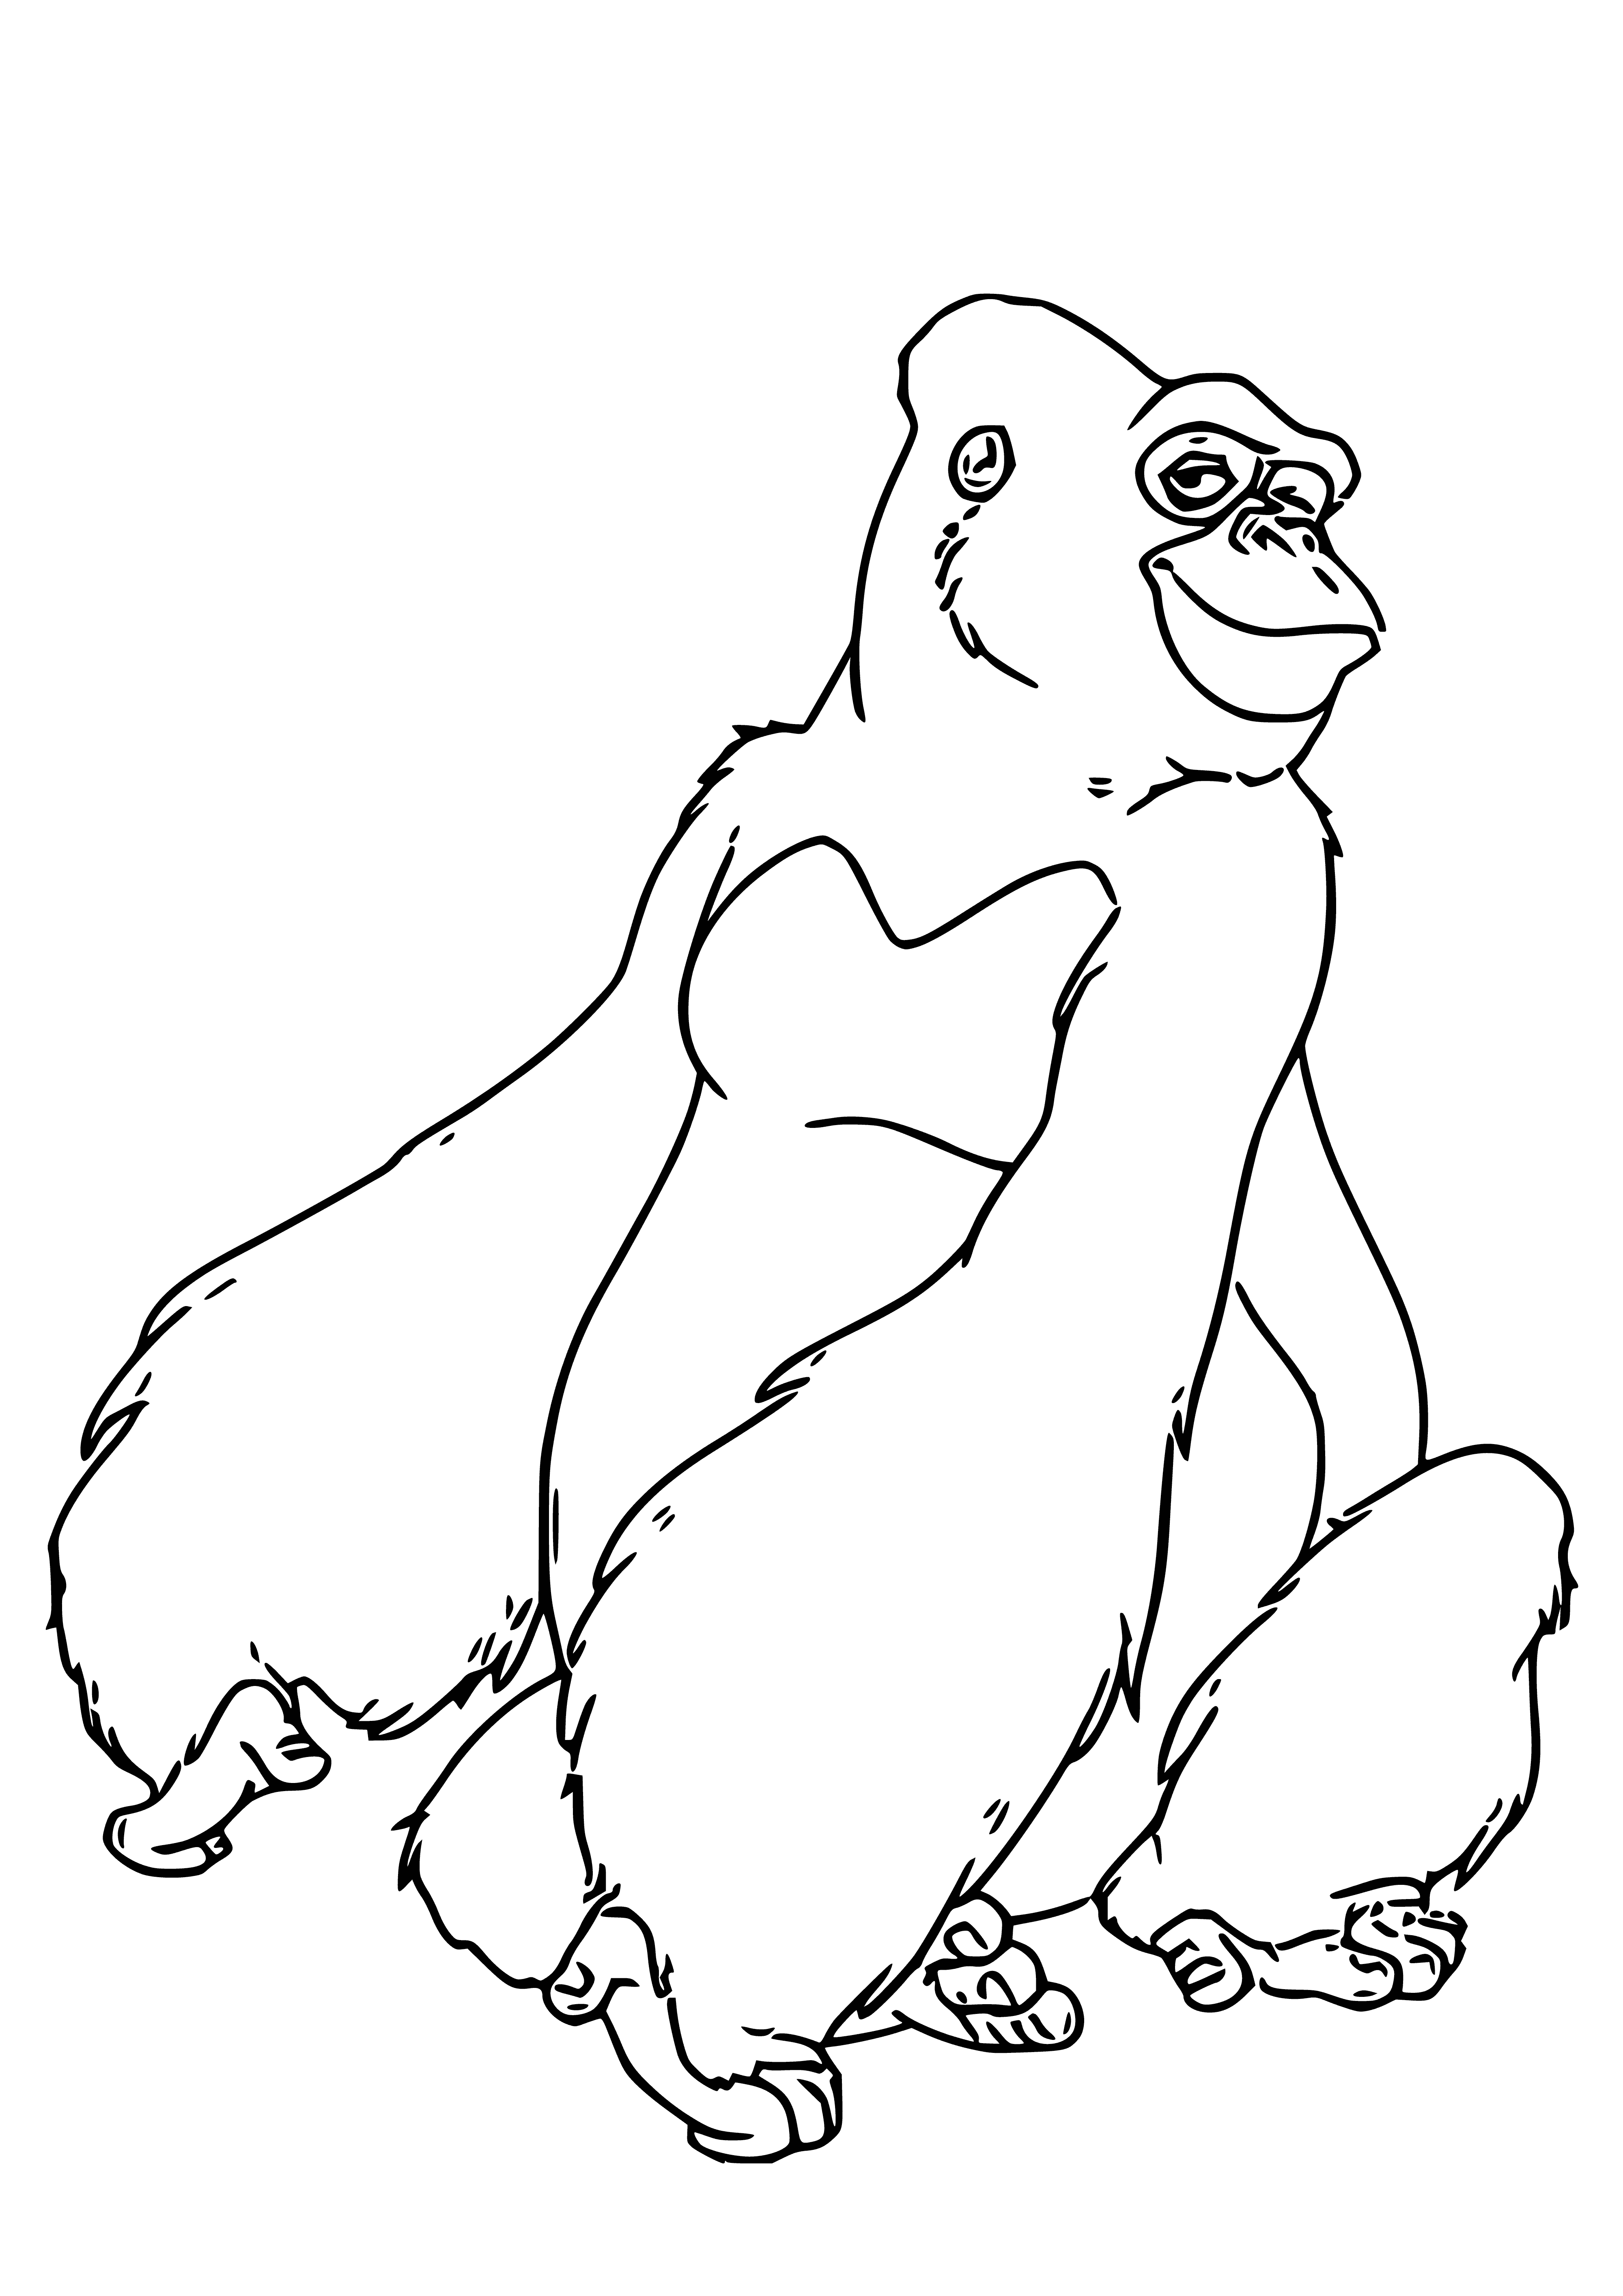 coloring page: Kala is a kind and loving gorilla, who acts as a patient teacher and helpful friend to Tarzan.